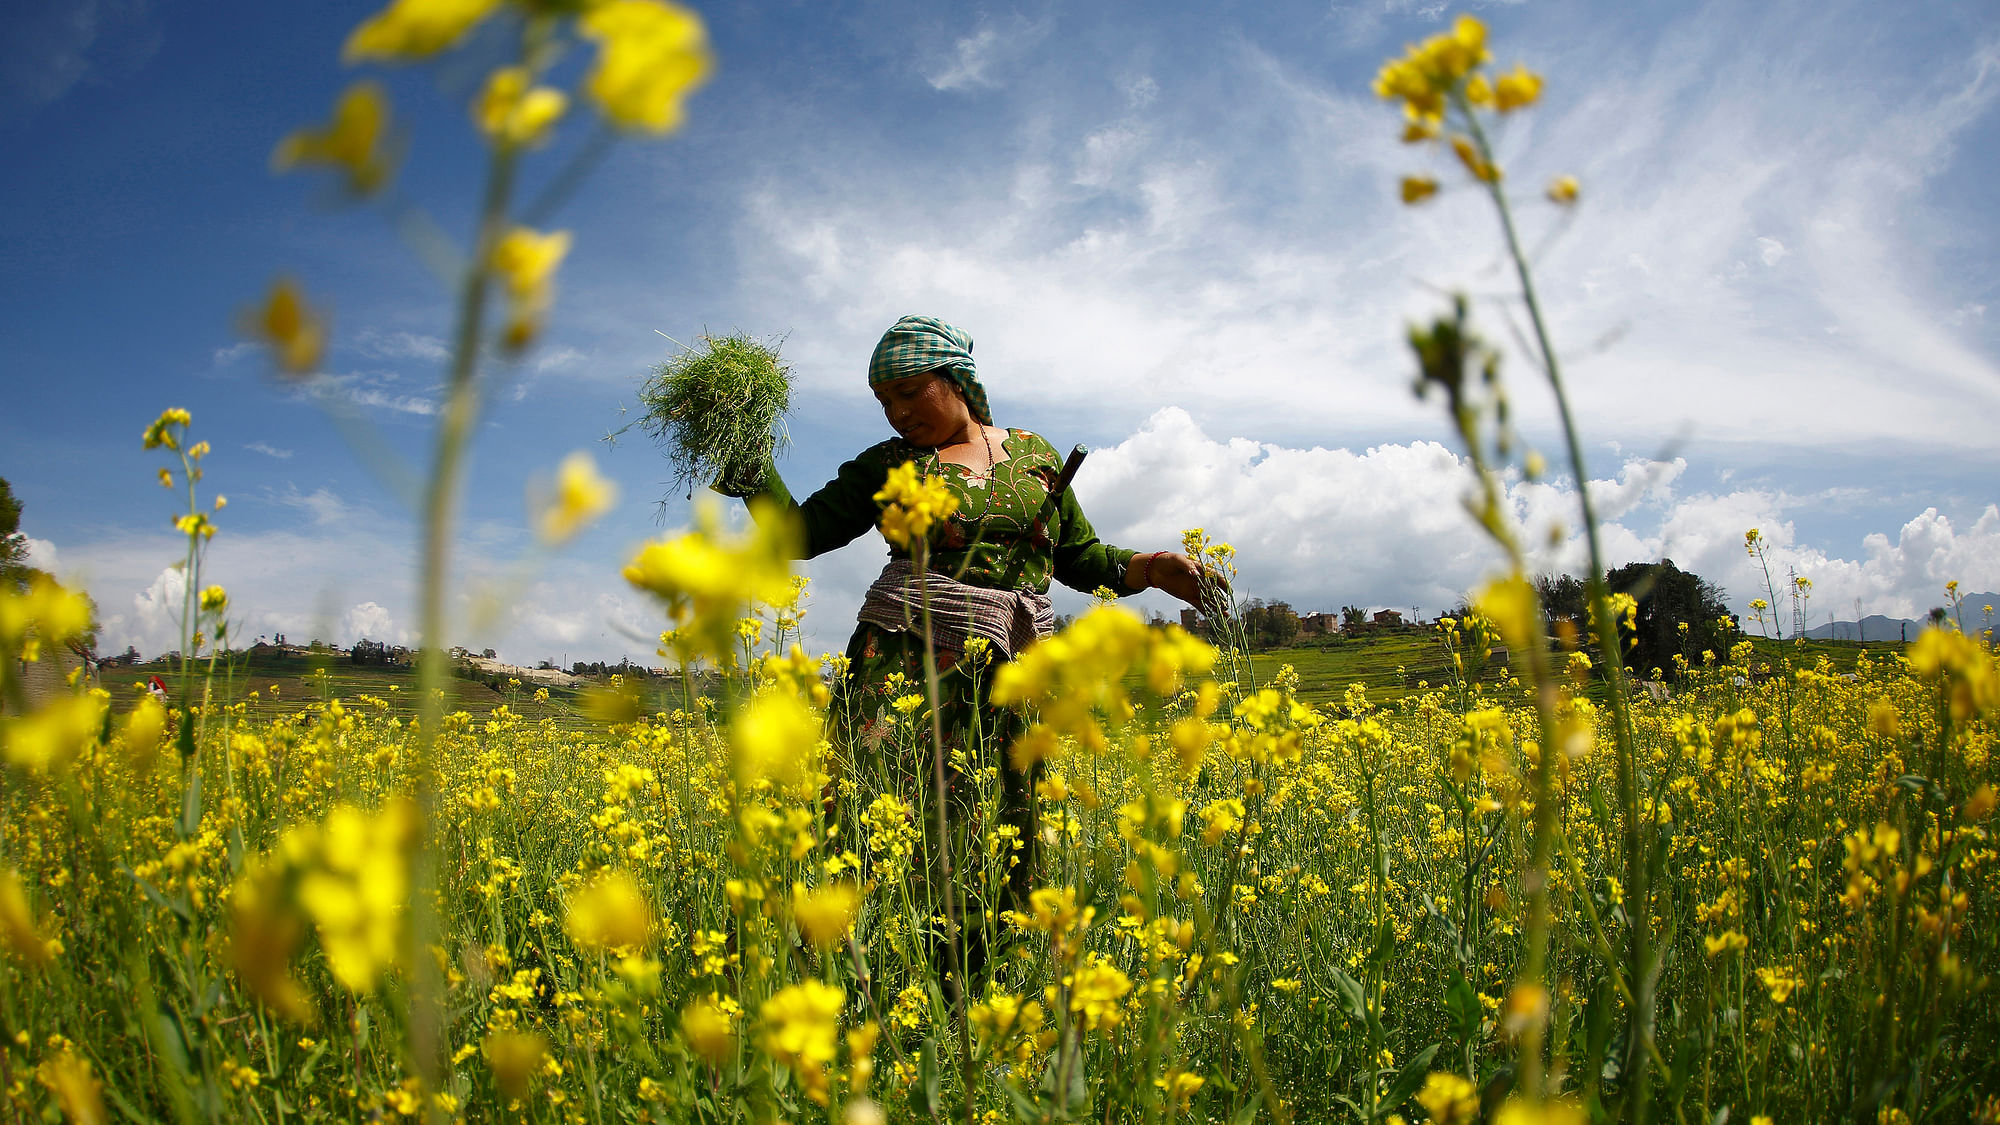 A woman works in the mustard fields. (Photo: Reuters)